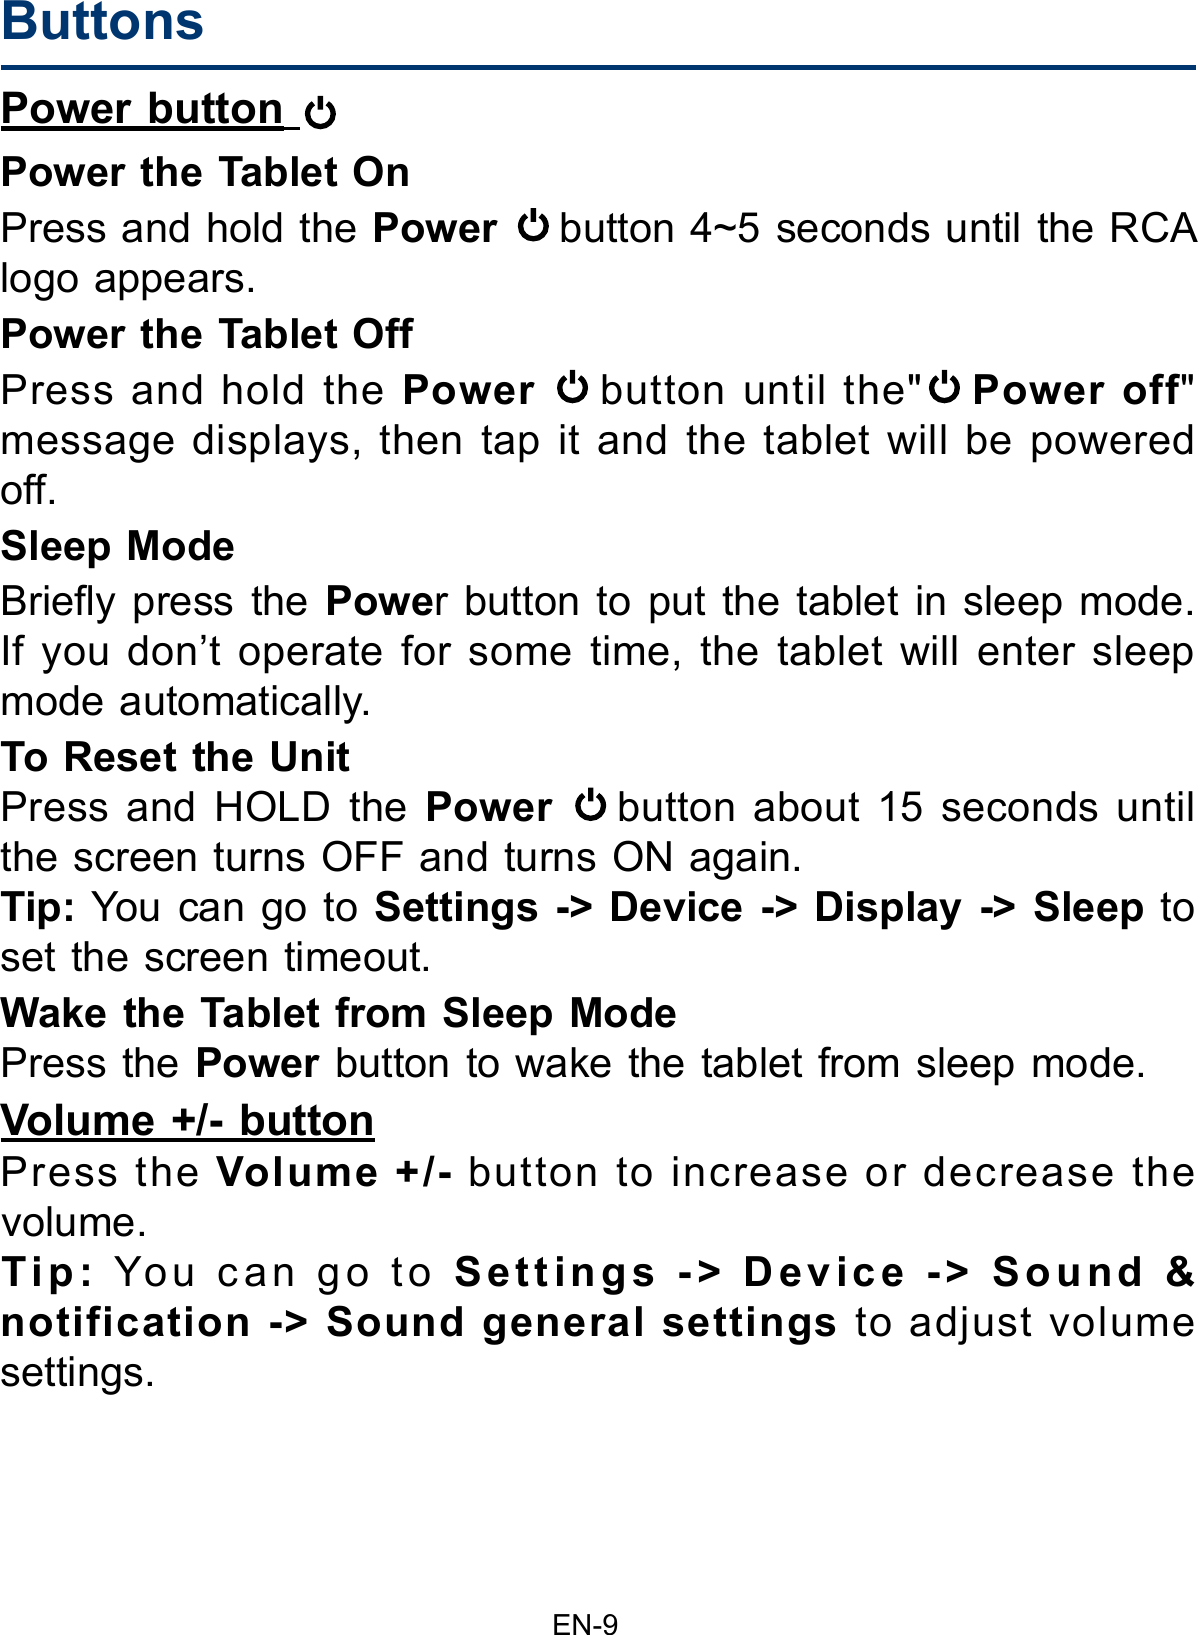 EN-9ButtonsPower button   Power the Tablet On Press and hold the Power button 4~5 seconds until the RCA logo appears. Power the Tablet Off Press and hold the Power button until the&quot; Power off&quot; message displays, then tap it and the tablet will be powered off.Sleep Mode Briey press the Power button to put the tablet in sleep mode.If you don’t operate for some time, the tablet will enter sleep mode automatically. To Reset the UnitPress and HOLD the Power button about 15 seconds until the screen turns OFF and turns ON again.Tip: You can go to Settings -&gt; Device -&gt; Display -&gt; Sleep to set the screen timeout.Wake the Tablet from Sleep Mode Press the Power button to wake the tablet from sleep mode.Volume +/- buttonPress the Volume +/- button to increase or decrease the volume. Tip: You can go to Settings -&gt; Device -&gt; Sound &amp; notification -&gt; Sound general settings to adjust volume settings.